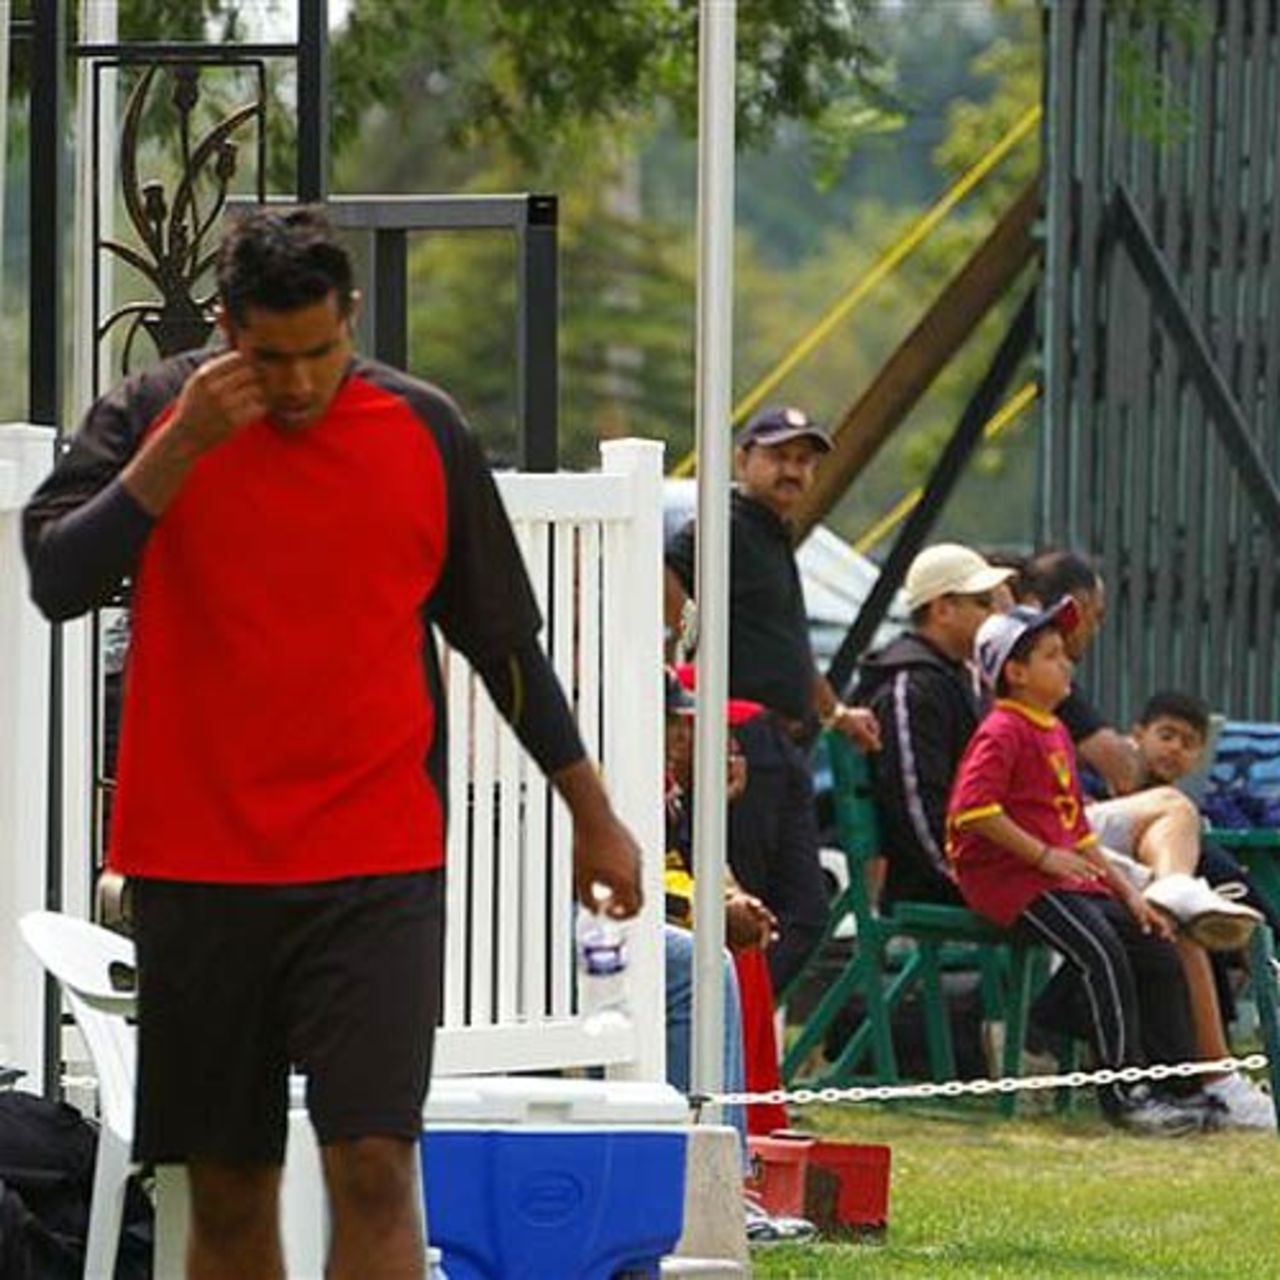 Kevin Sandher, the Canadian slow left-arm bowler, seems deep in thought after taking three wickets for 24 in his side's ten-wicket victory over USA, at Maple Leaf Cricket Club, August 26, 2006